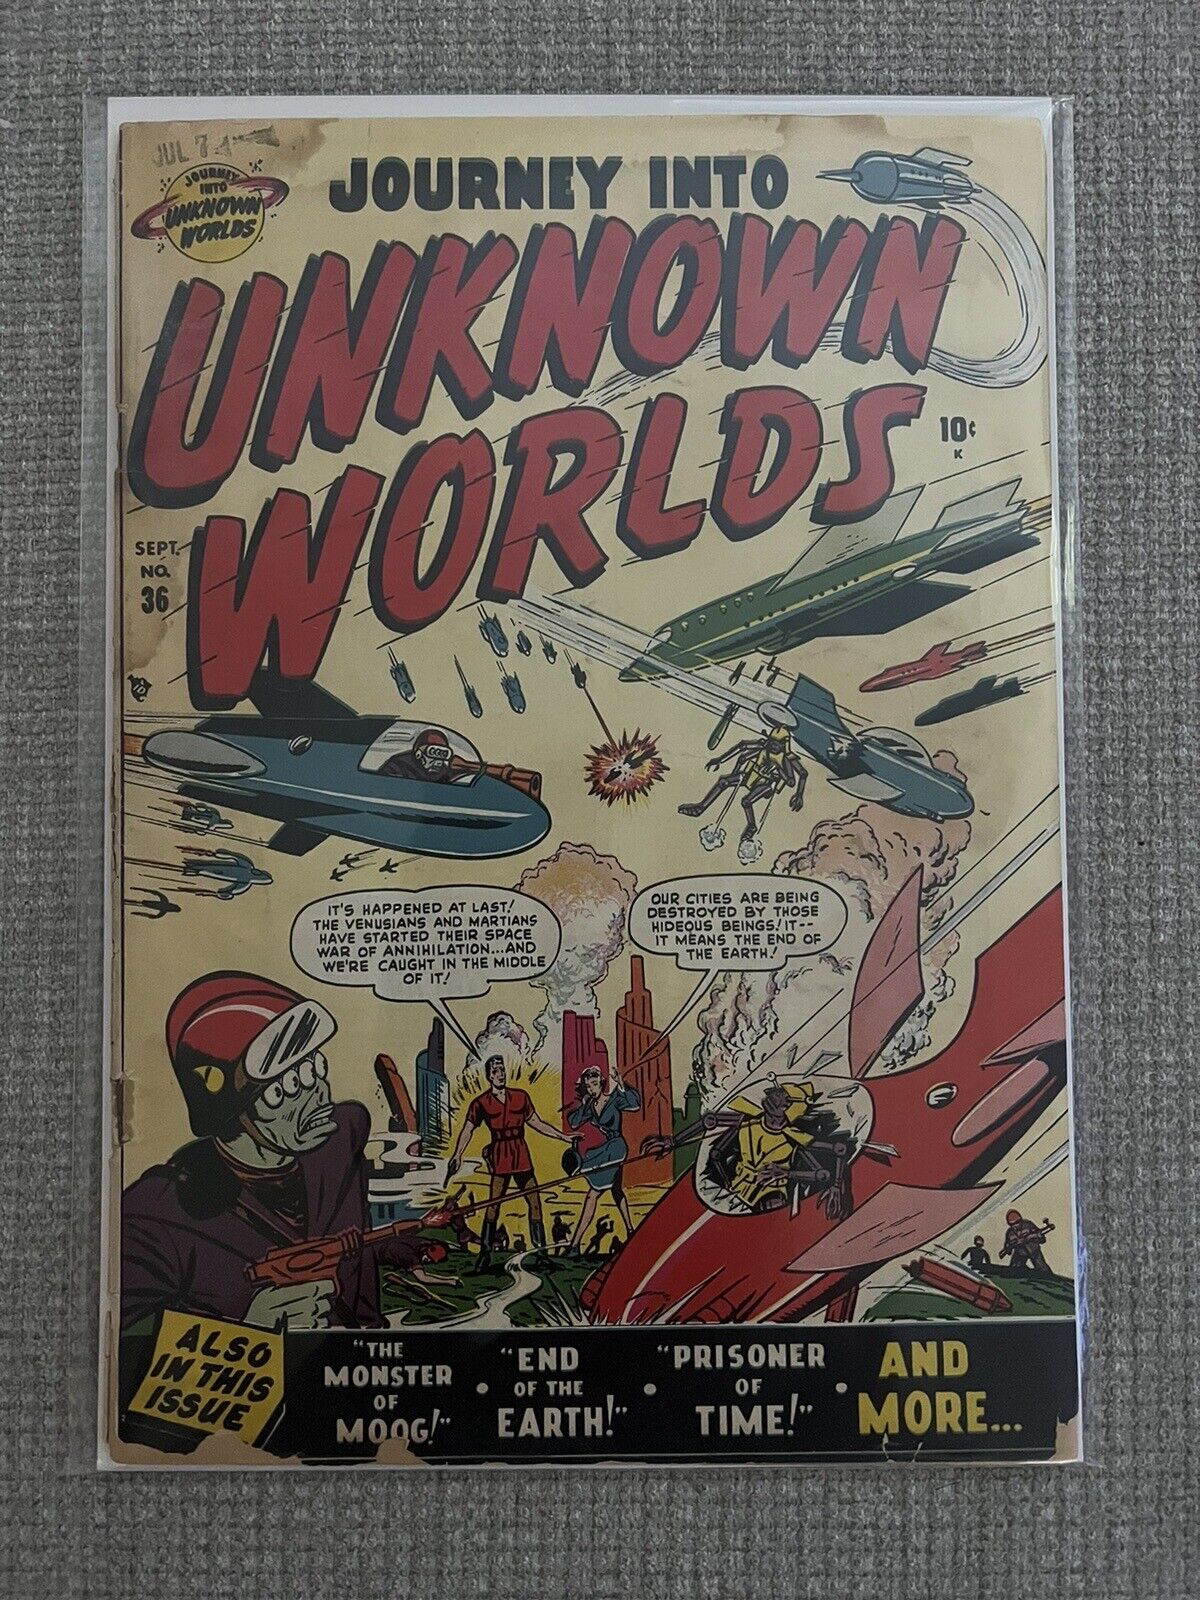 JOURNEY INTO UNKNOWN WORLDS #36 (#1) 1950 ATLAS FIRST ISSUE Russ Hearth COVER